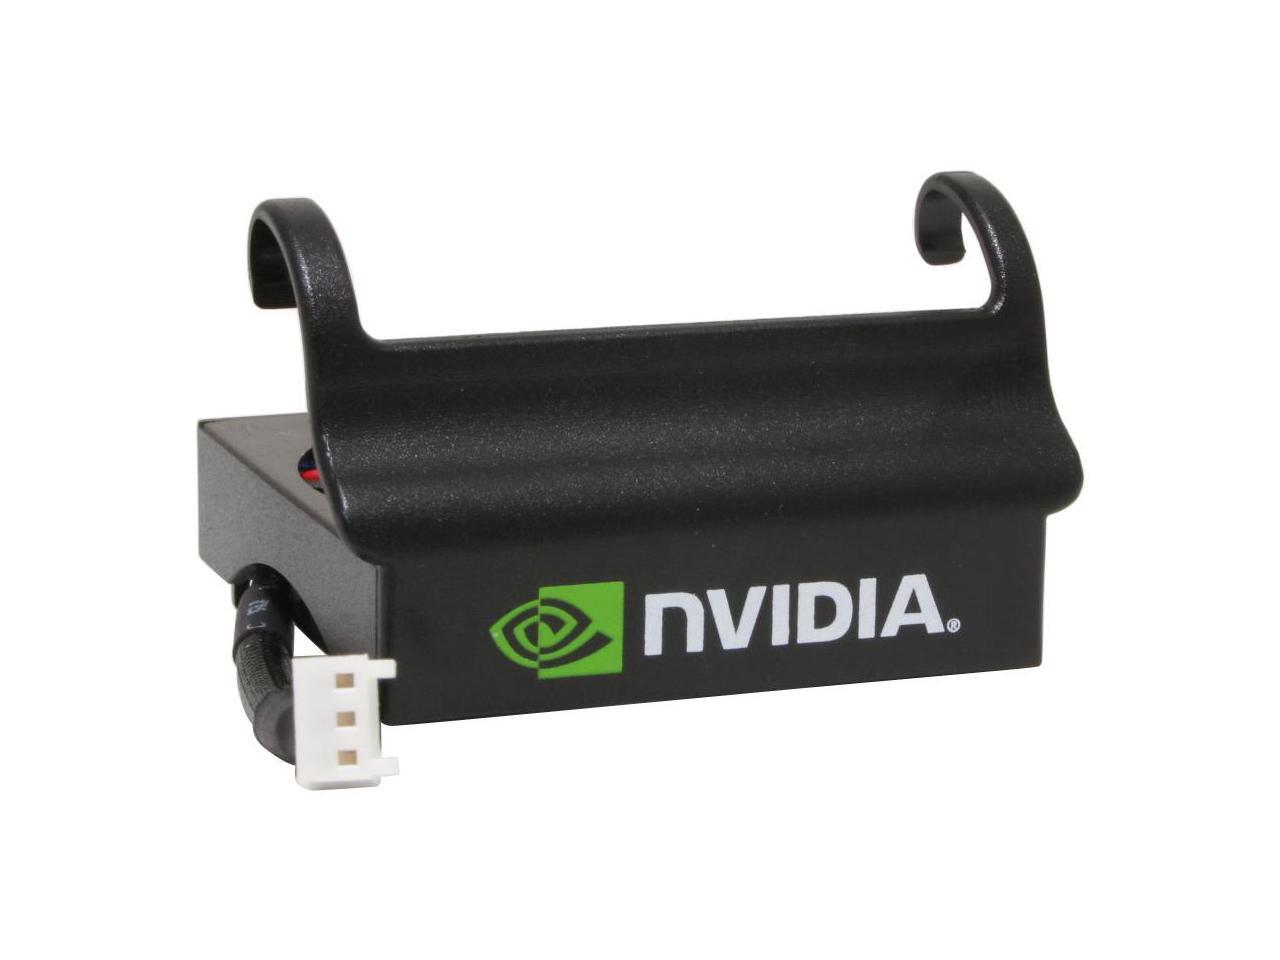 nvidia nforce drivers networking controller 122-ck-nf68